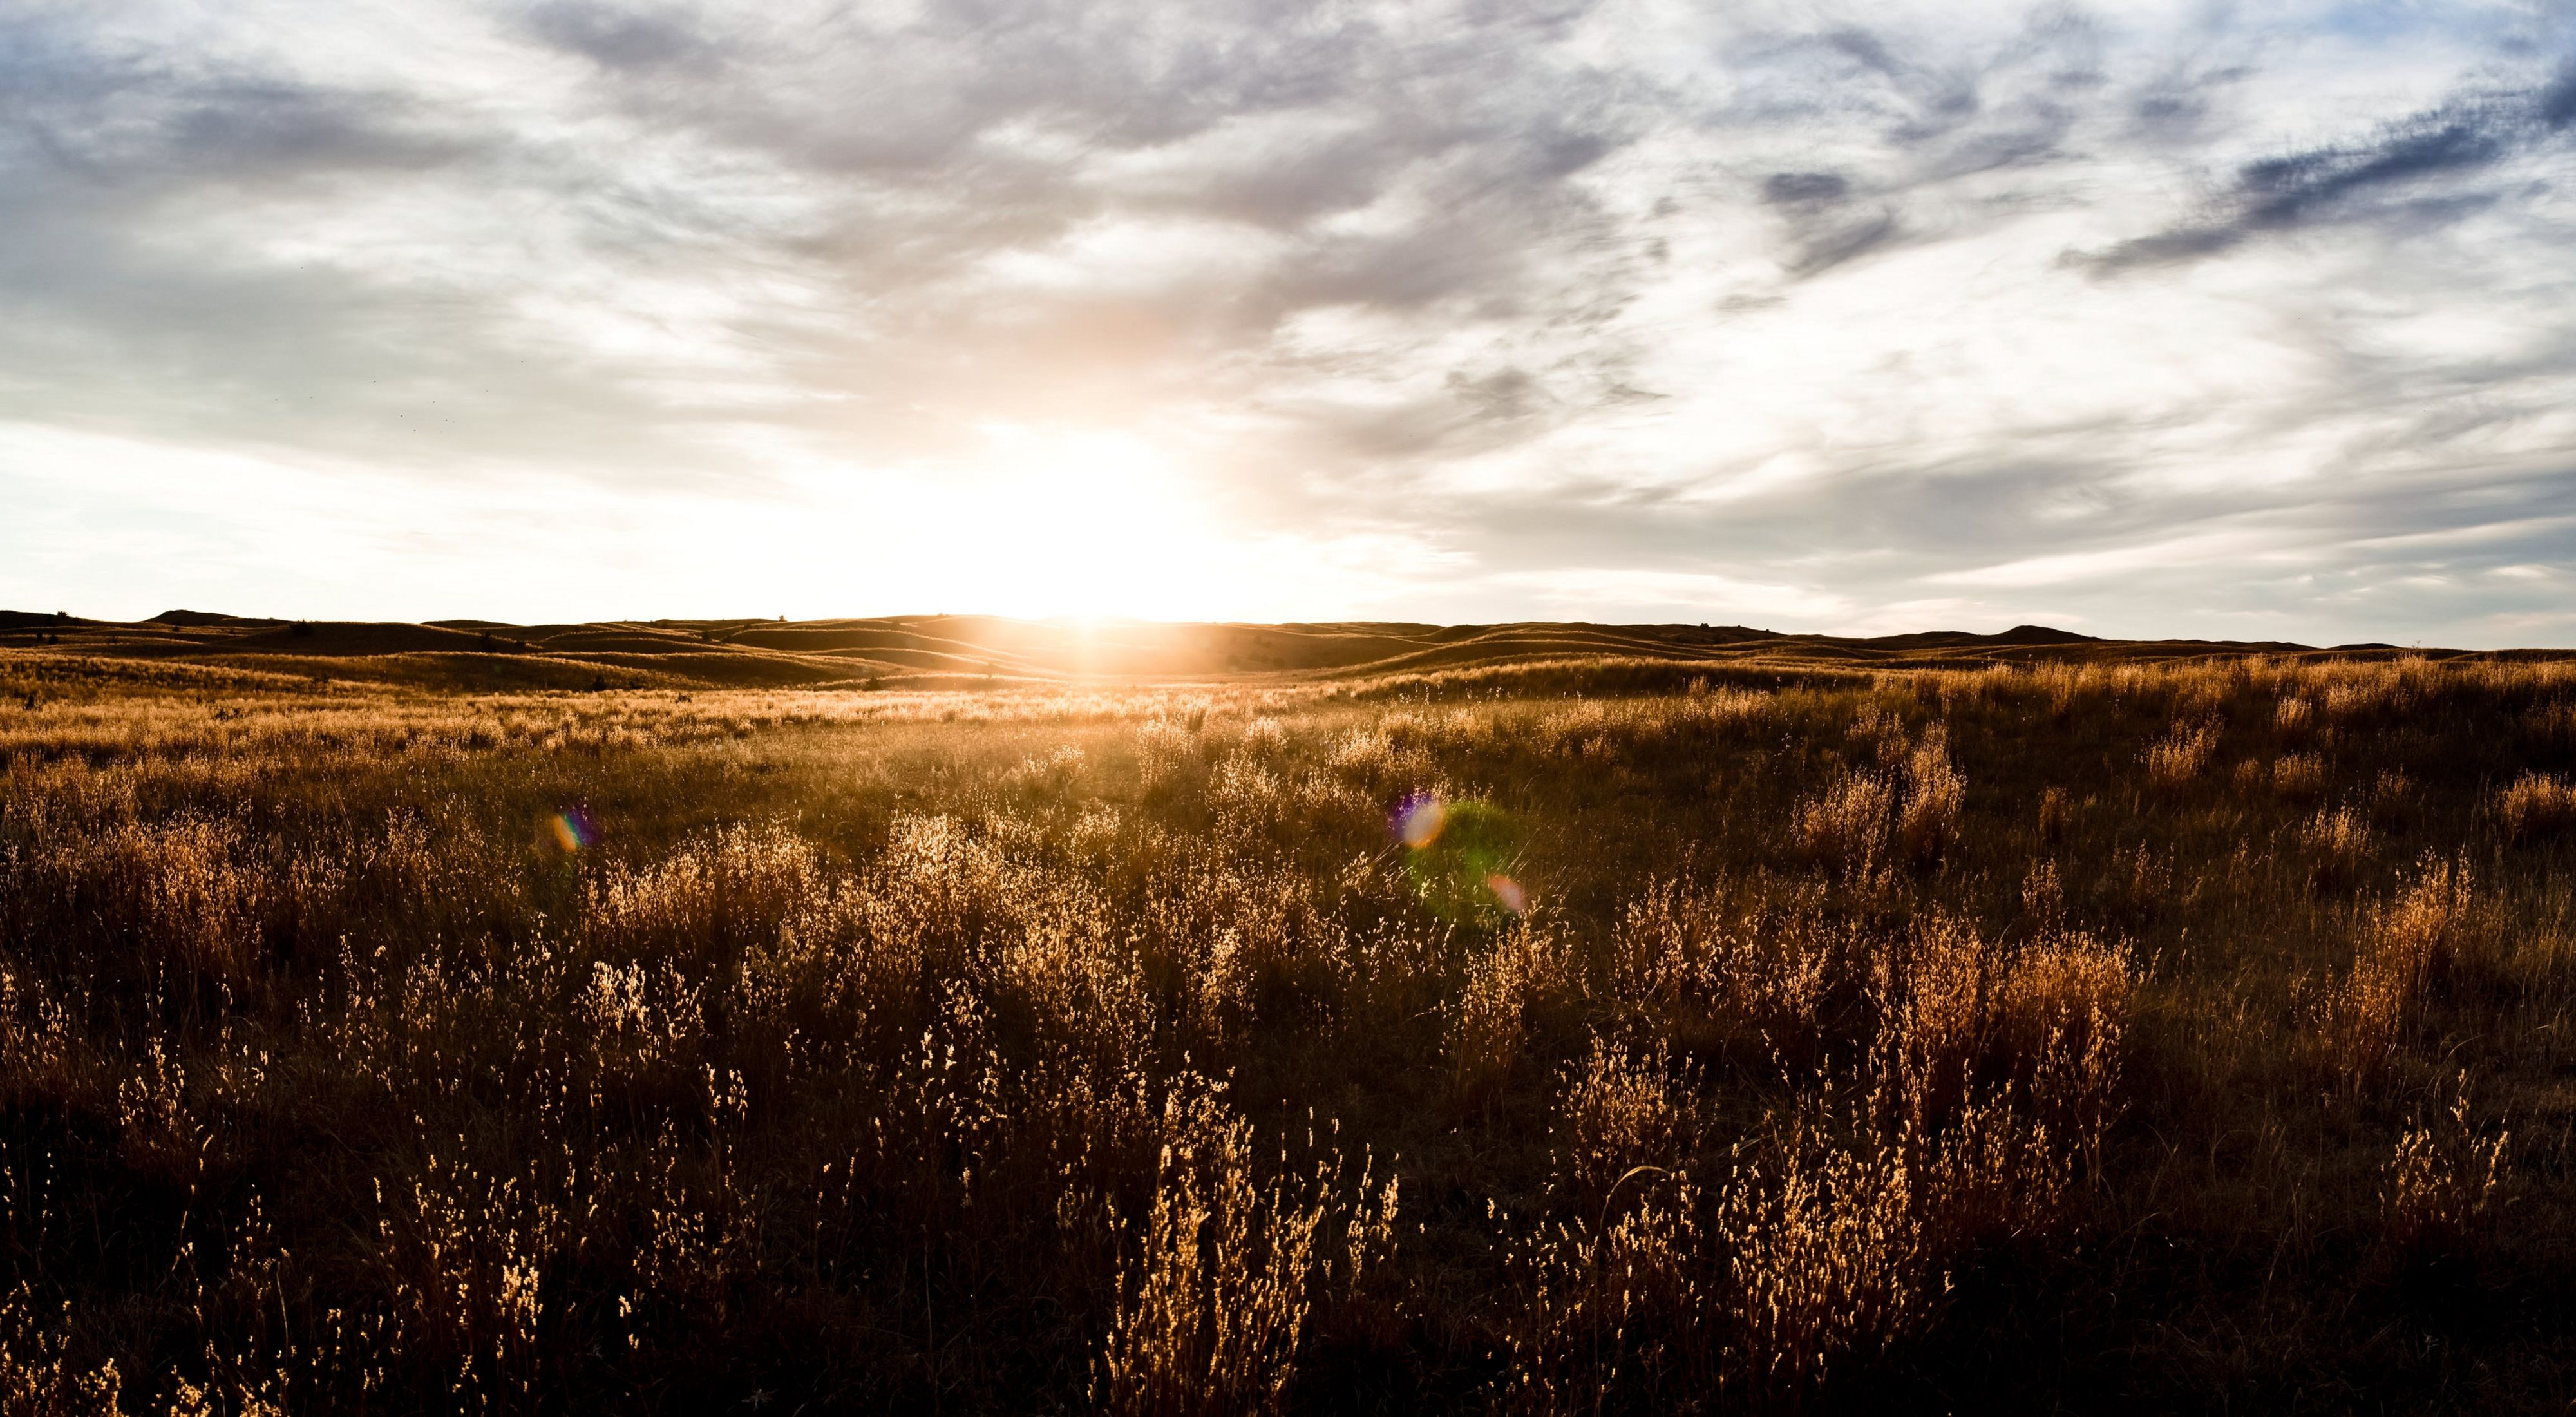 The sun sets along the horizon of a wide expanse of grassland, turning the landscape a golden brown color.